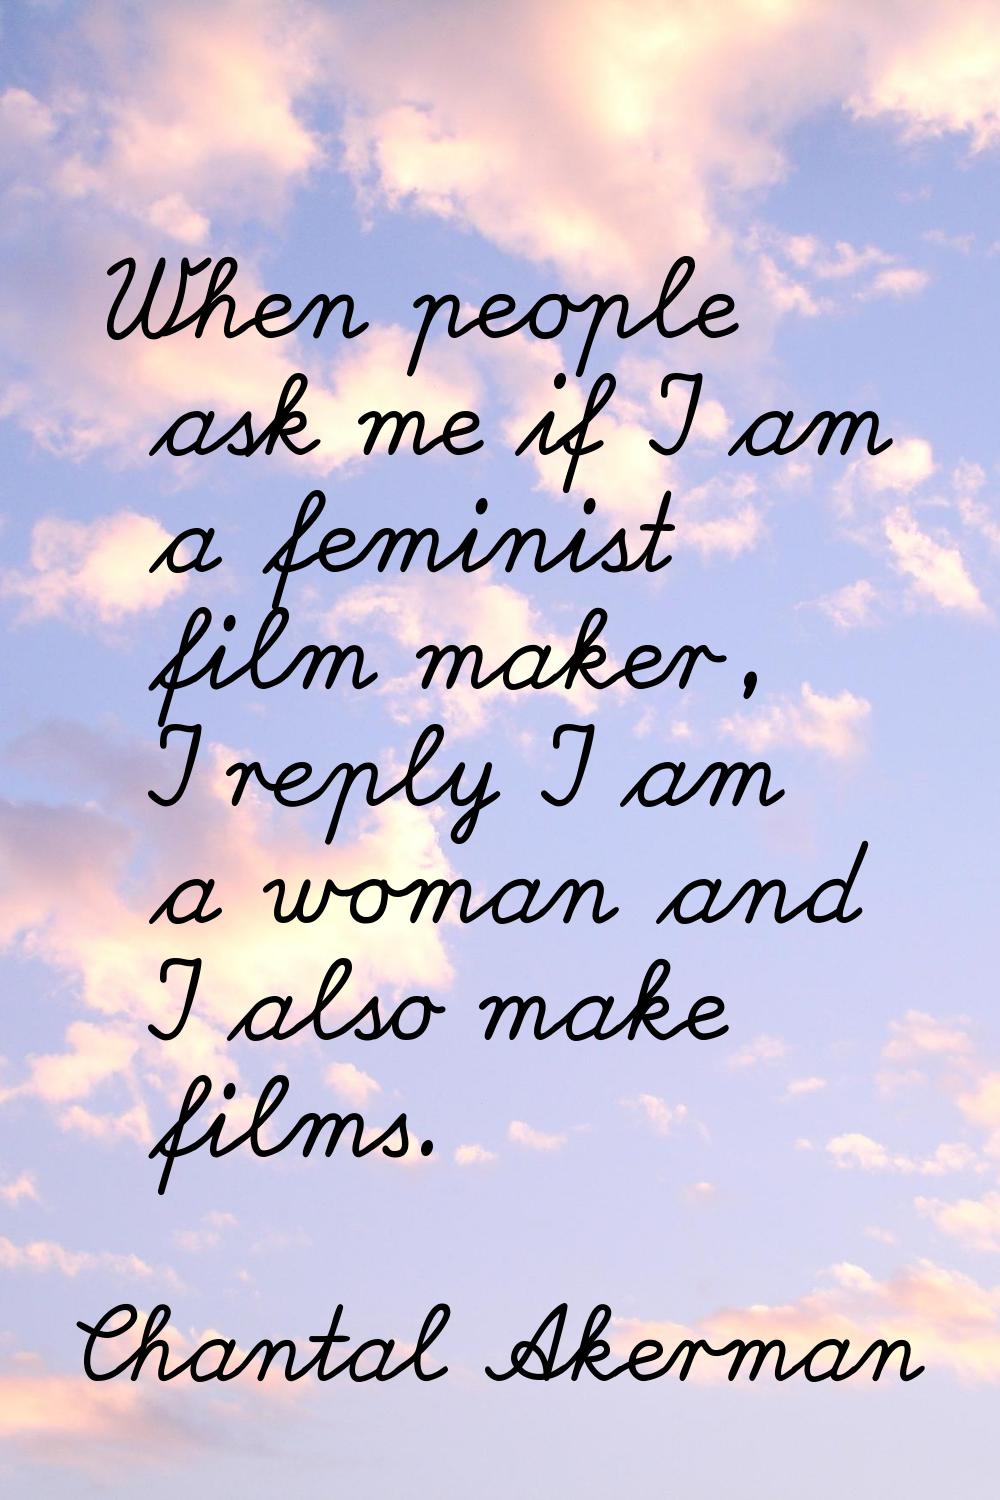 When people ask me if I am a feminist film maker, I reply I am a woman and I also make films.